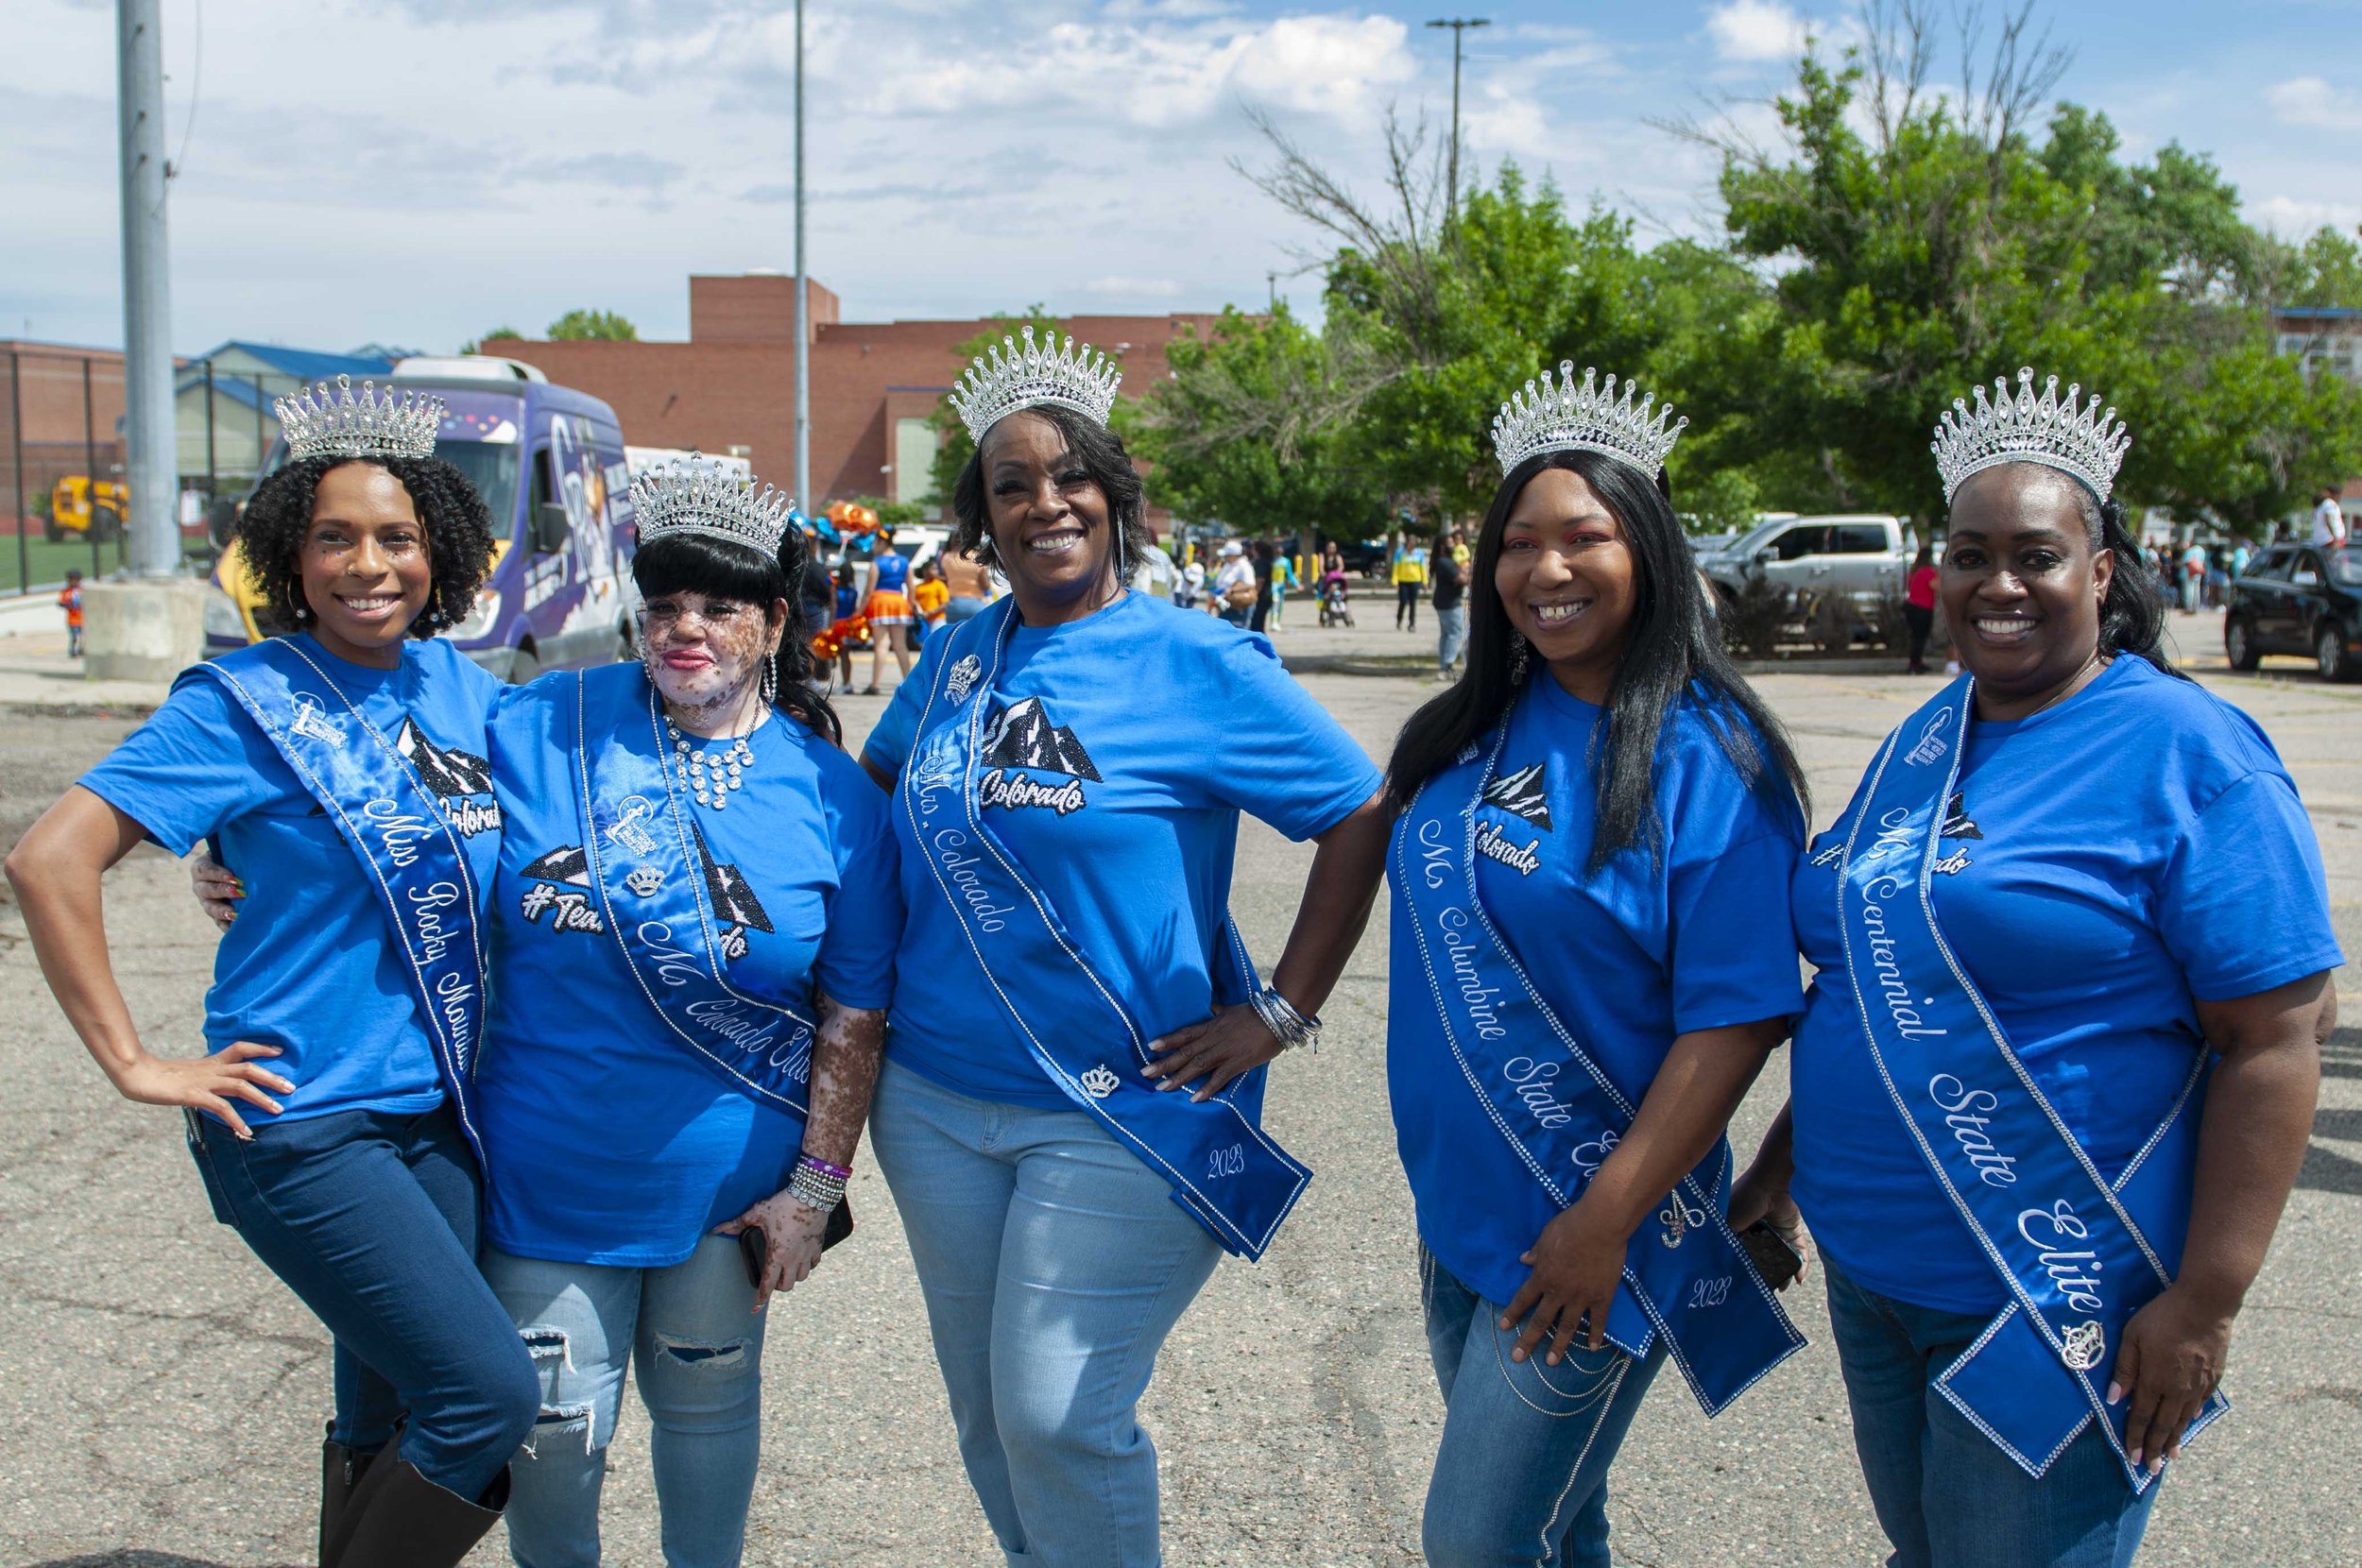    Ladies of the Colorado All World Queens pose for a photo before the start of the Juneteenth parade   